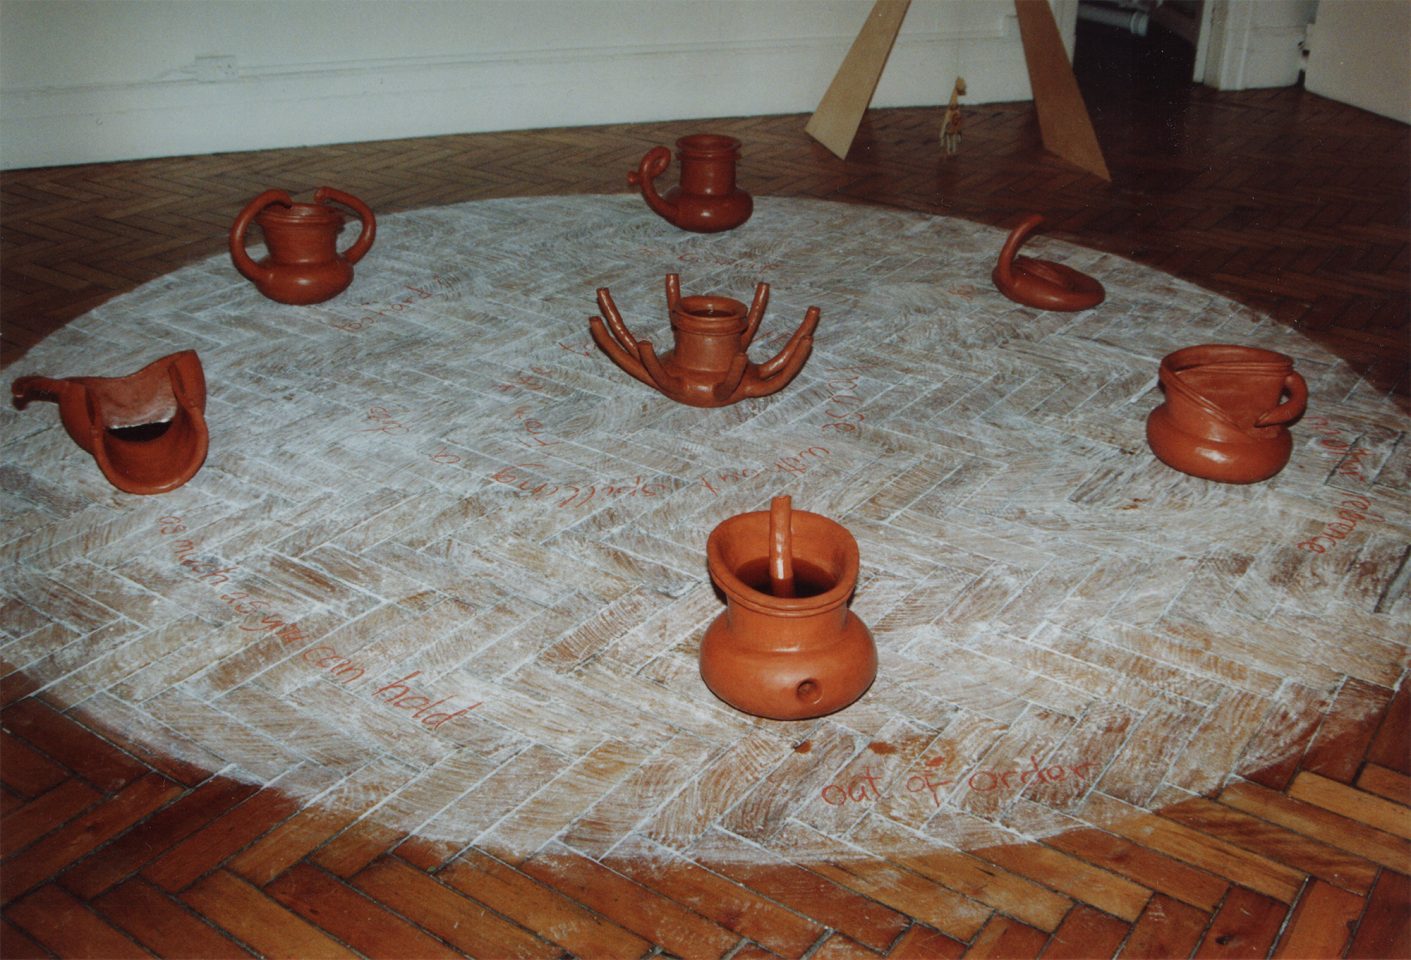 A parquet floor with a white circle drawn on, with terracotta objects positioned in the circle